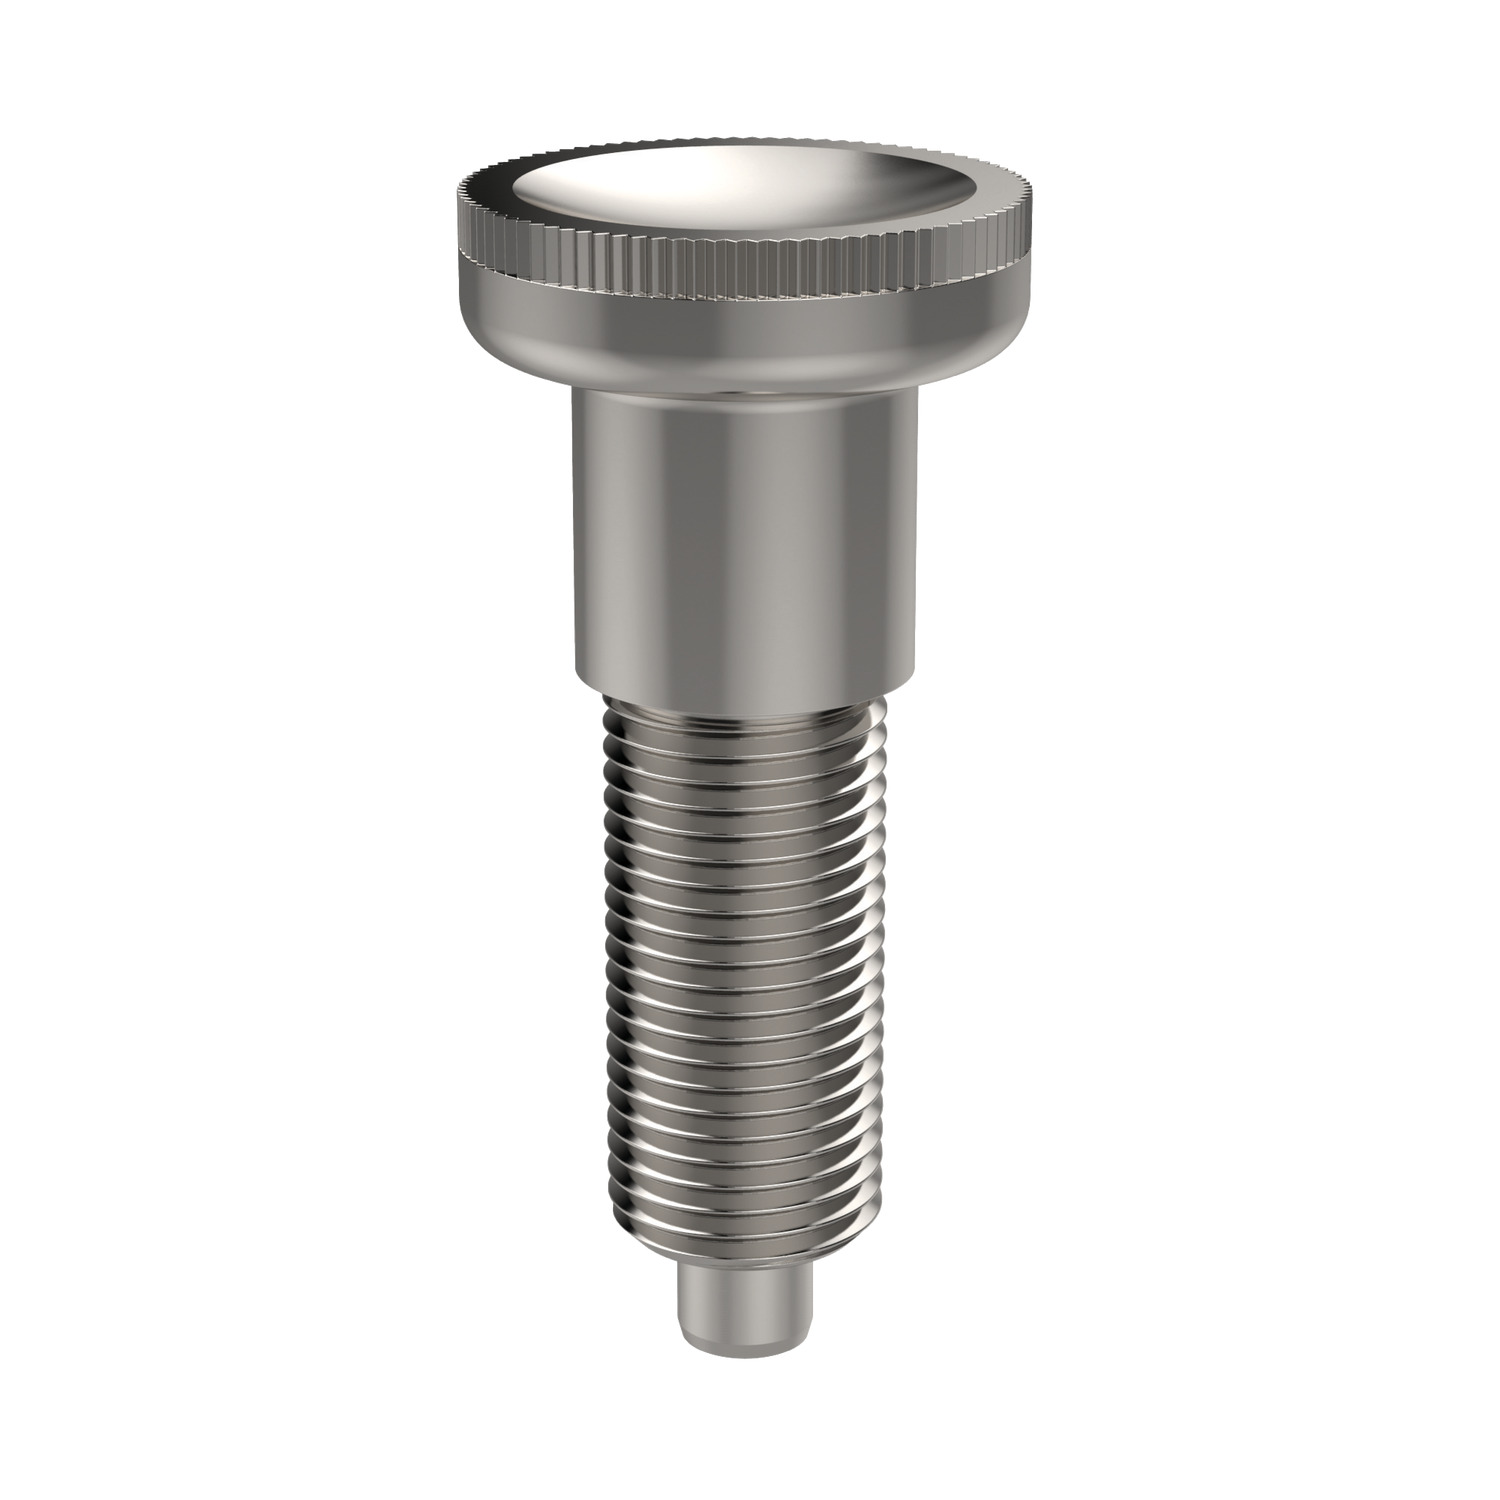 32742.W0710 All Stainless Steel Index Plunger 10 - M20 x 1.5 ALL STAINLESS